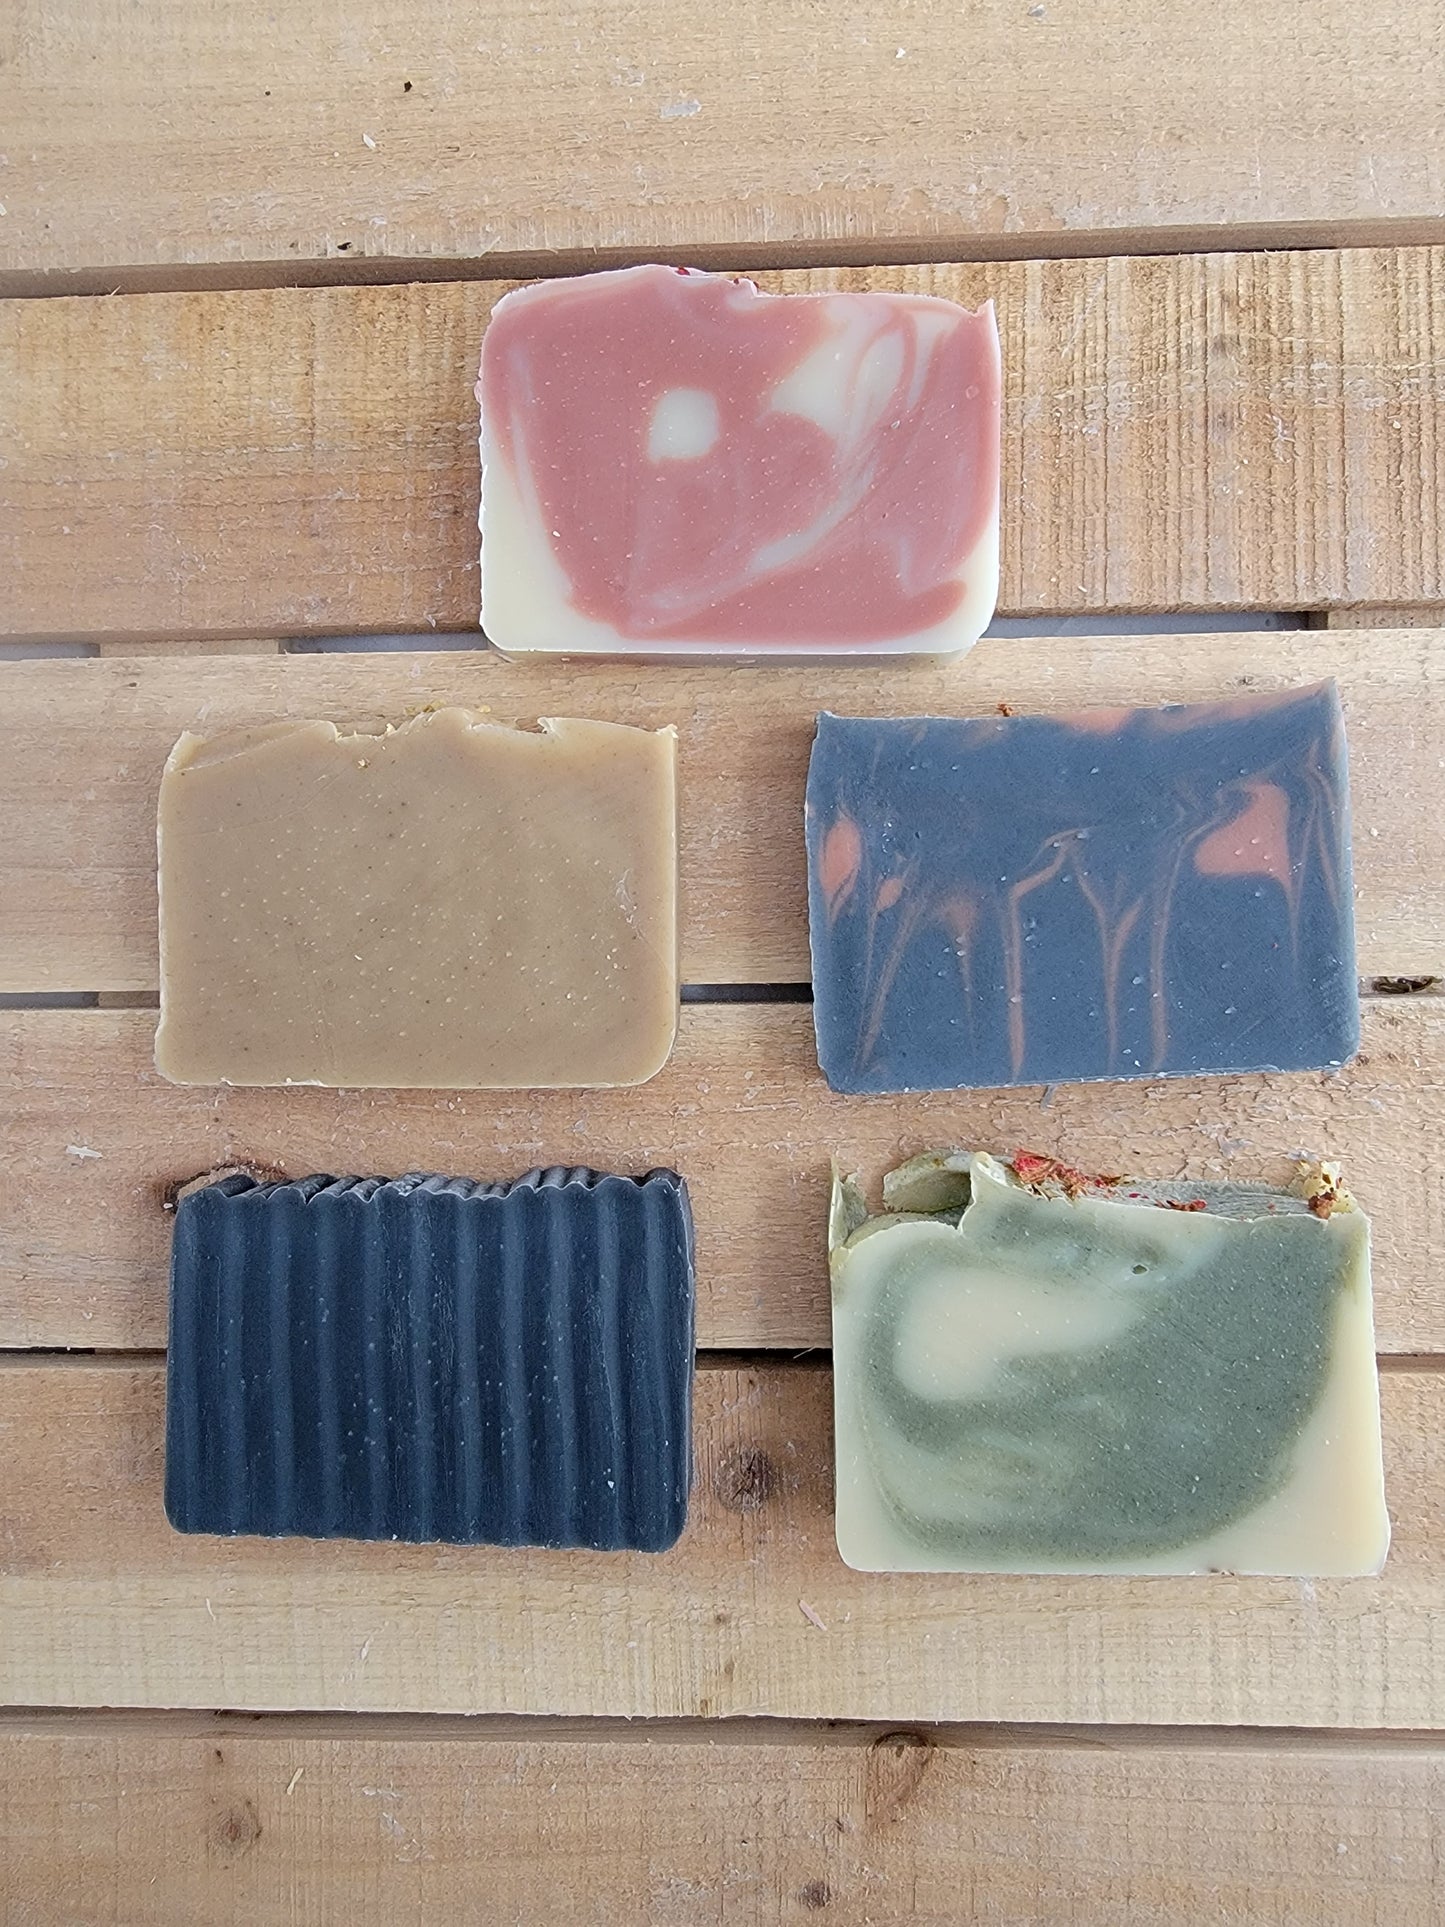 Petites | Handmade and Natural | Sunflower Soaps